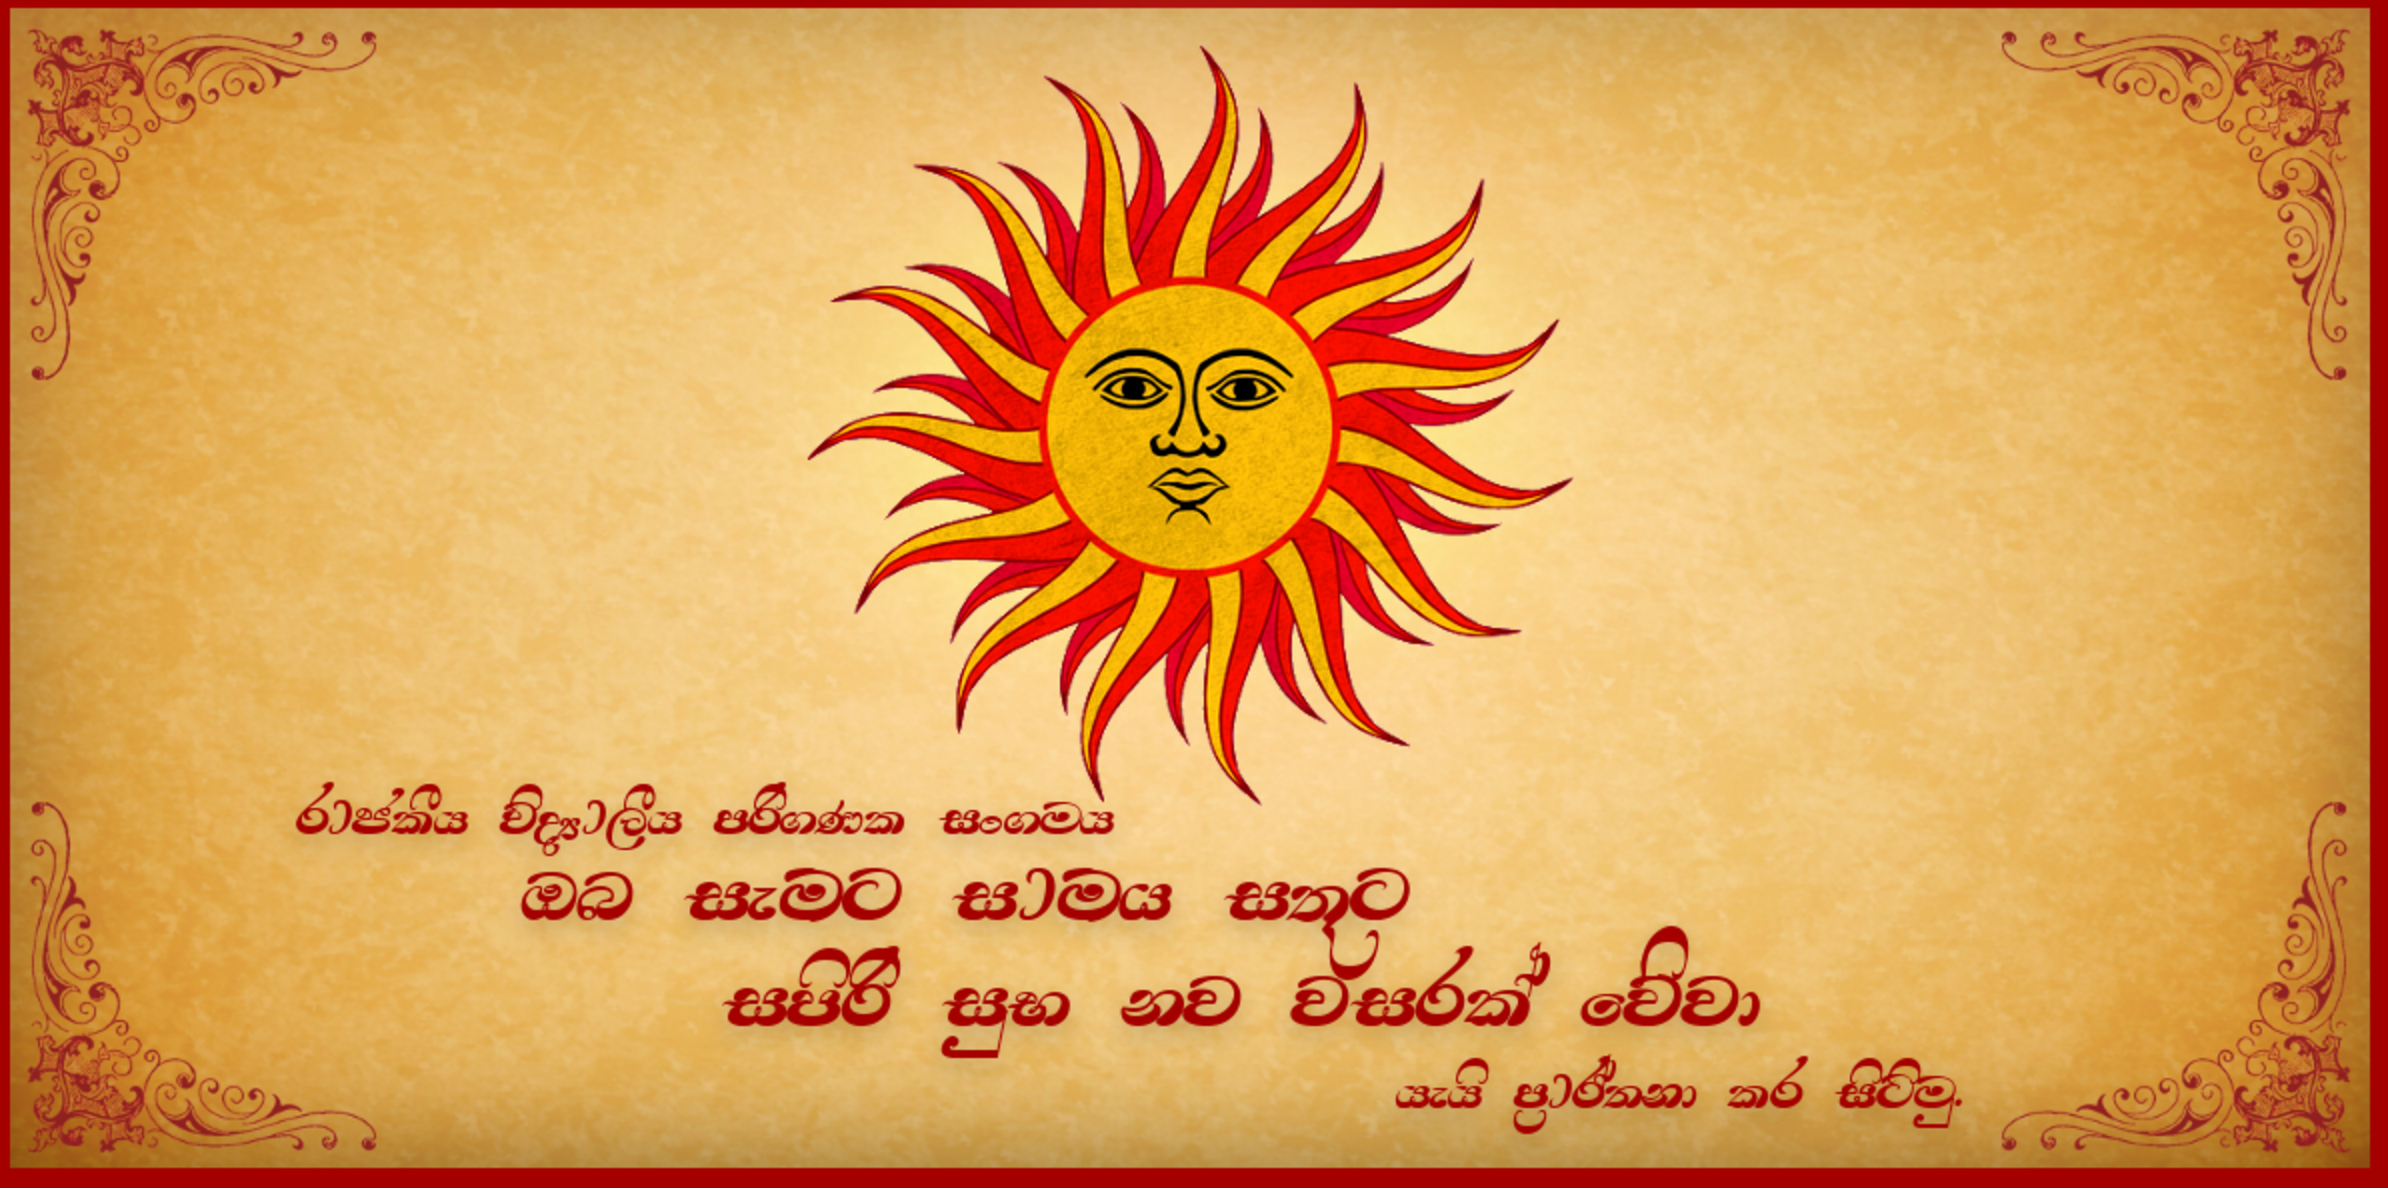 Sinhala And Tamil New Year 52344 - Sinhala New Year 2019 , HD Wallpaper & Backgrounds